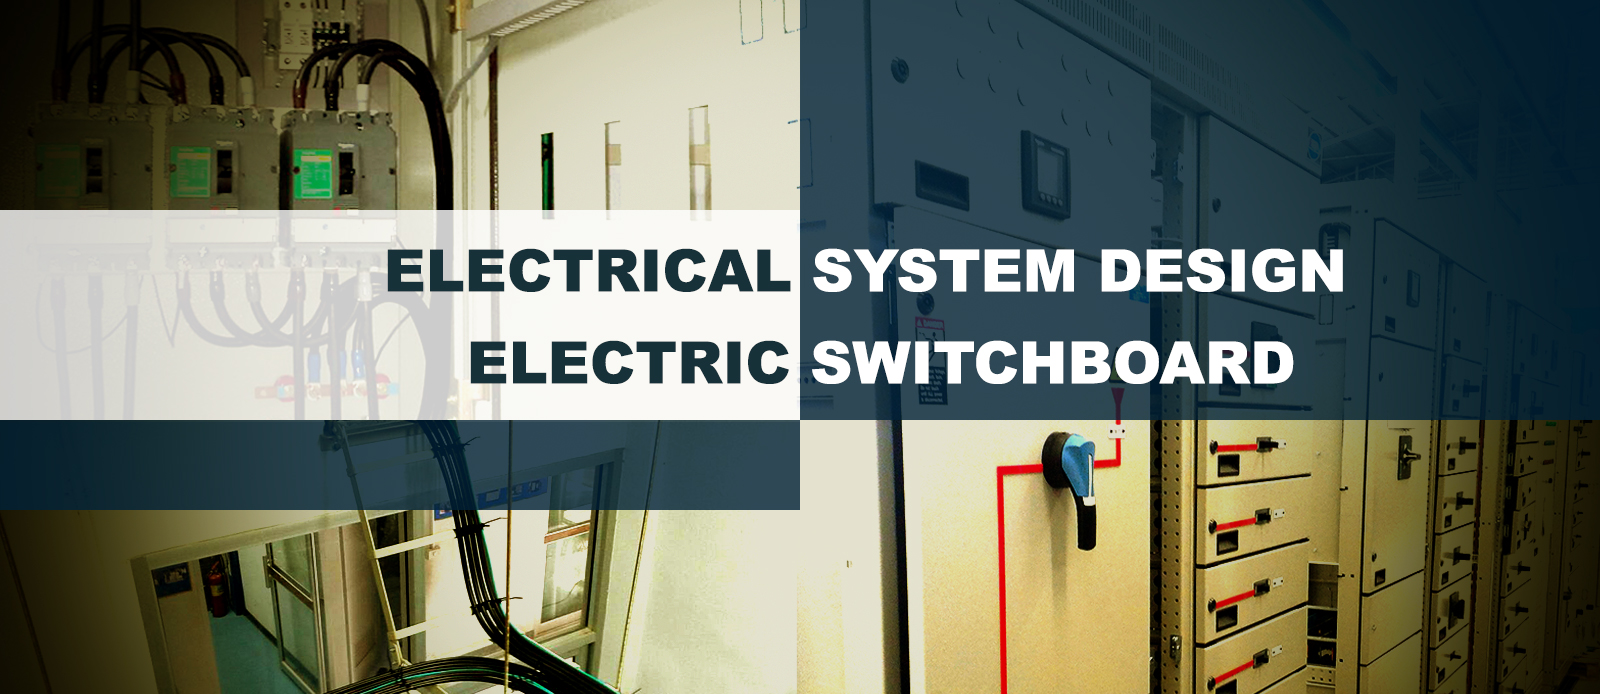 Electrical System Design and Electric Switchboard